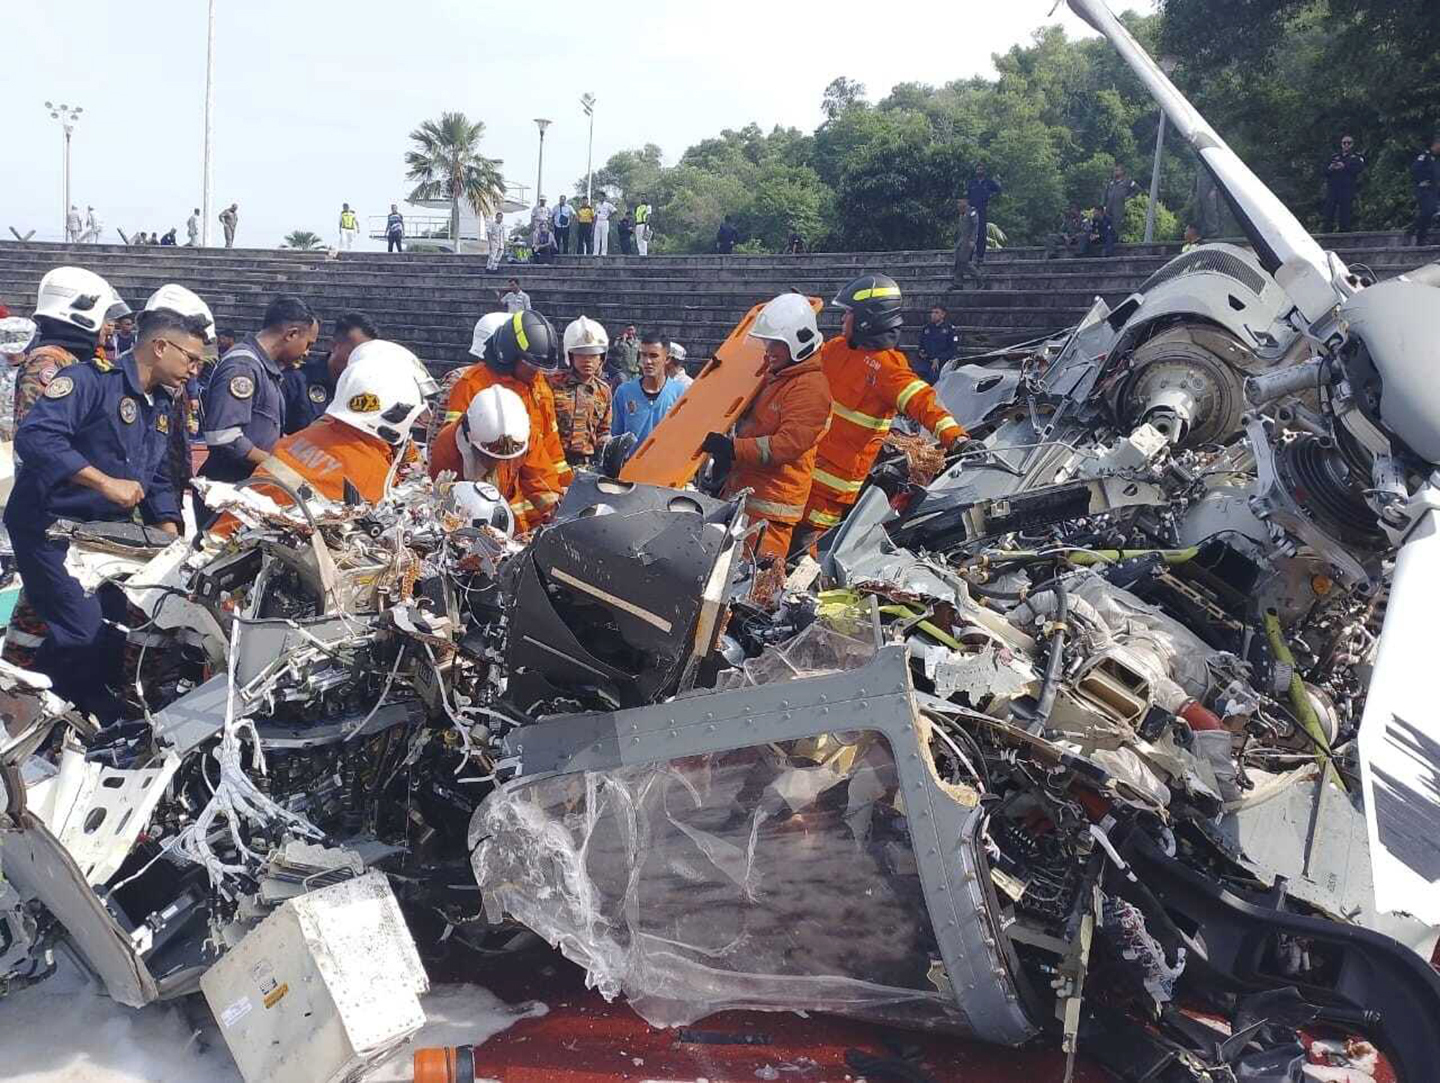 First responders inspect the crash site of two helicopters in Perak state on April 23.